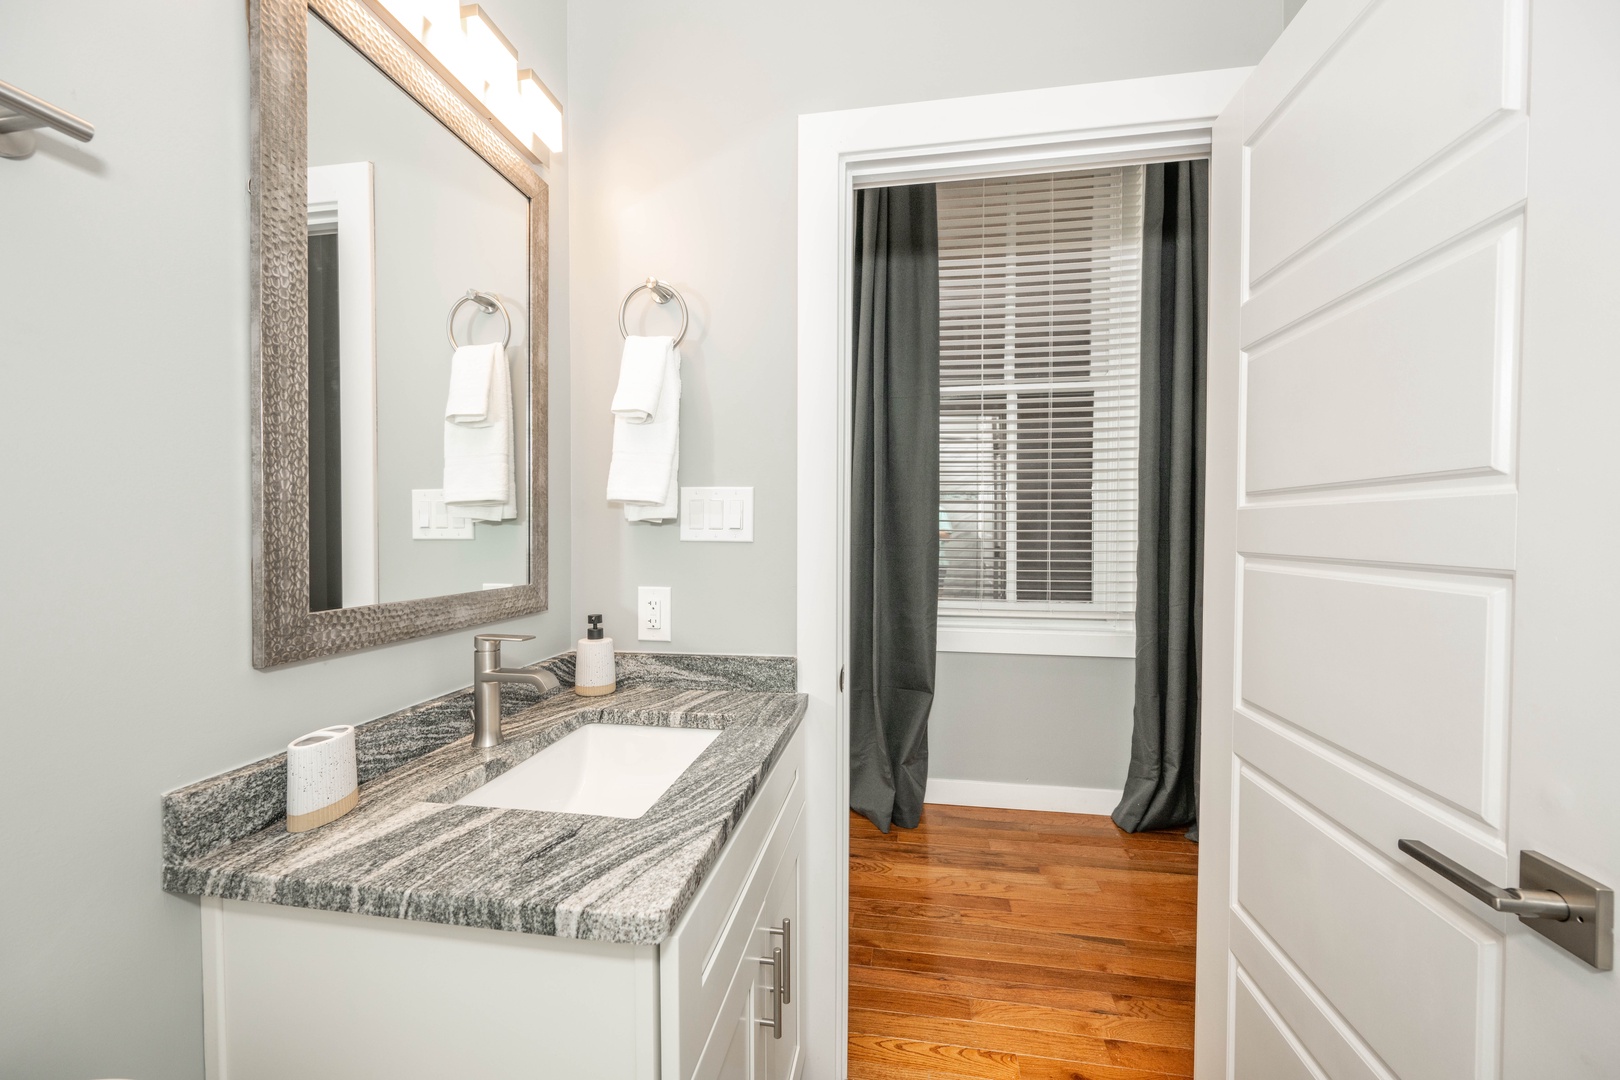 The chic full bathroom offers a single vanity & shower/tub combo